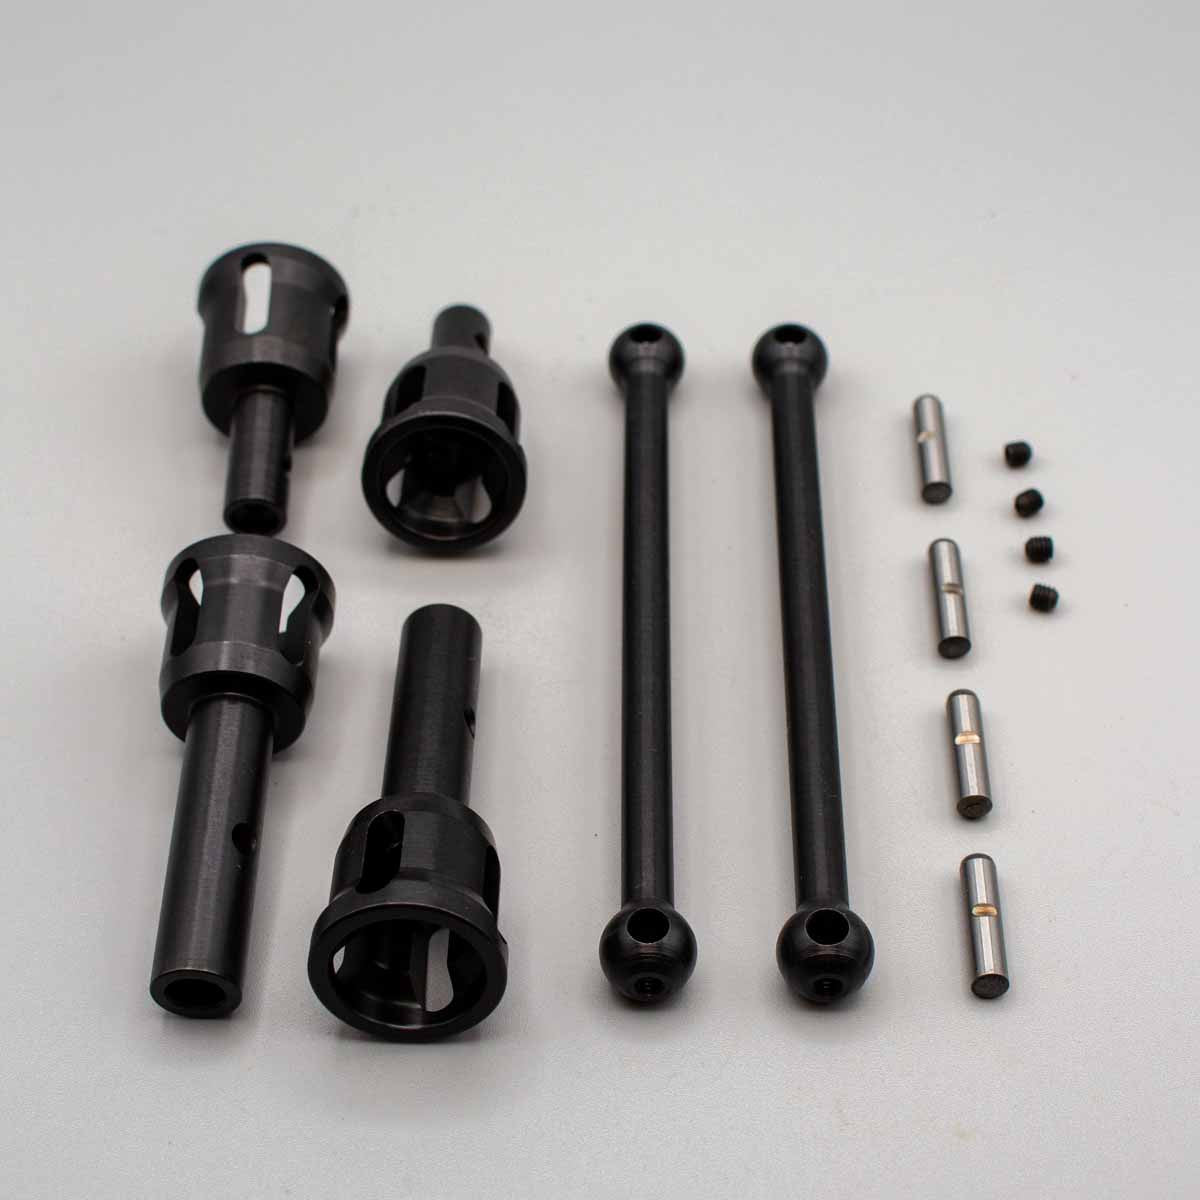 FLM: Super Duty "4 Ever" Stock Length Driveshaft & Cup Kit for HPI Baja 5b/5T/ 5SC - 5mm Cups/Pins